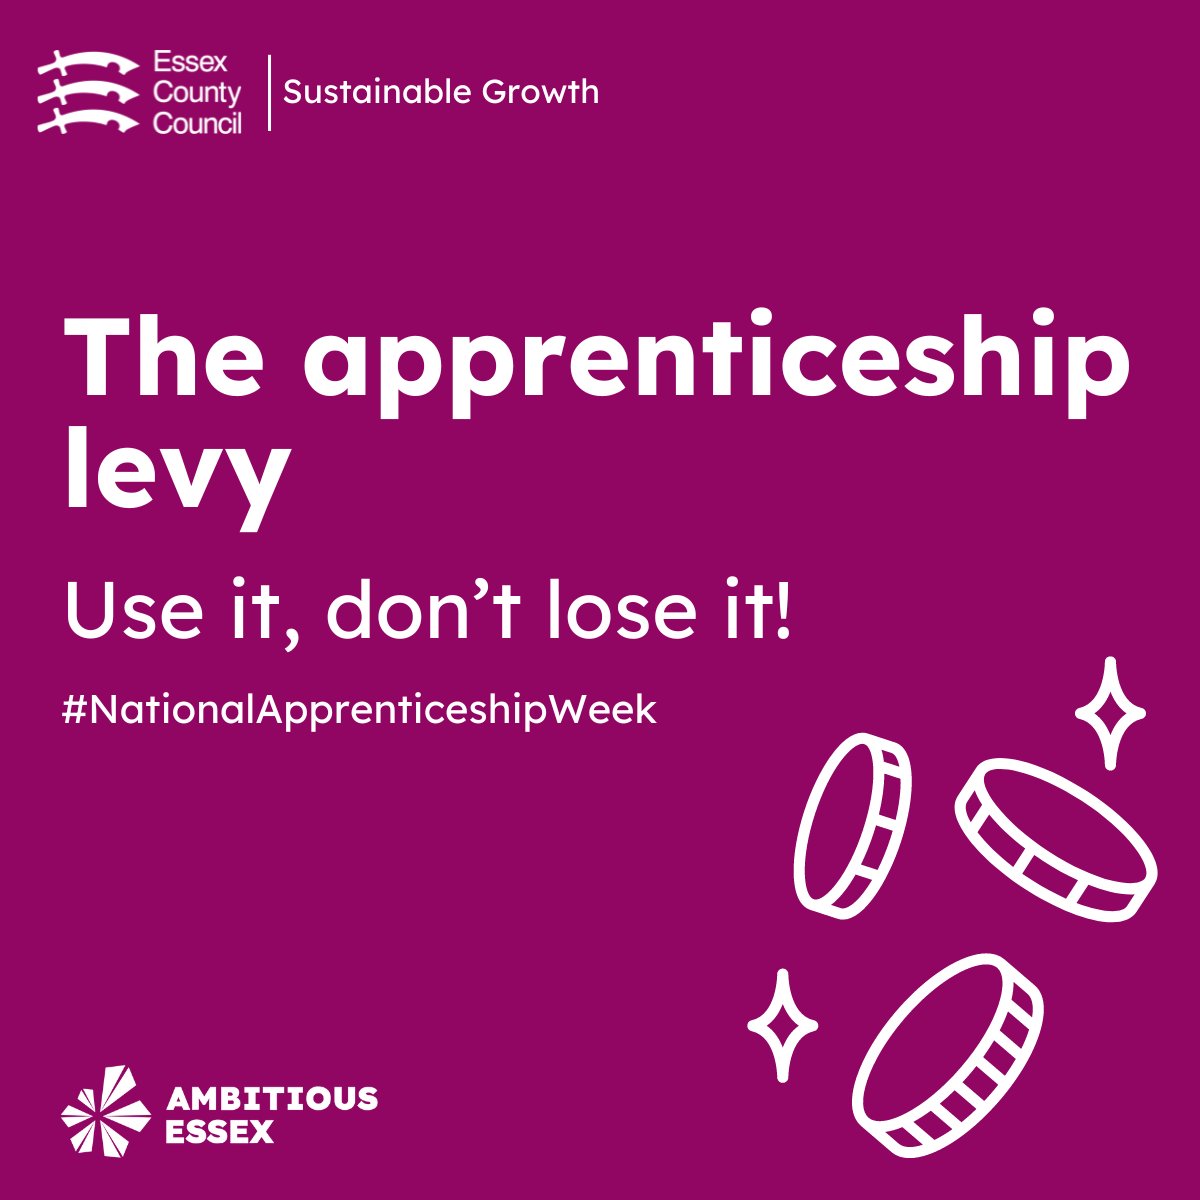 Donate your unspent apprenticeship levy this #NationalApprenticeshipWeek 💰 Does your business have a payroll of over £3m? You could donate your unspent levy to help a local SME recruit an apprentice! Find out more and start the levy transfer journey: essexalts.co.uk